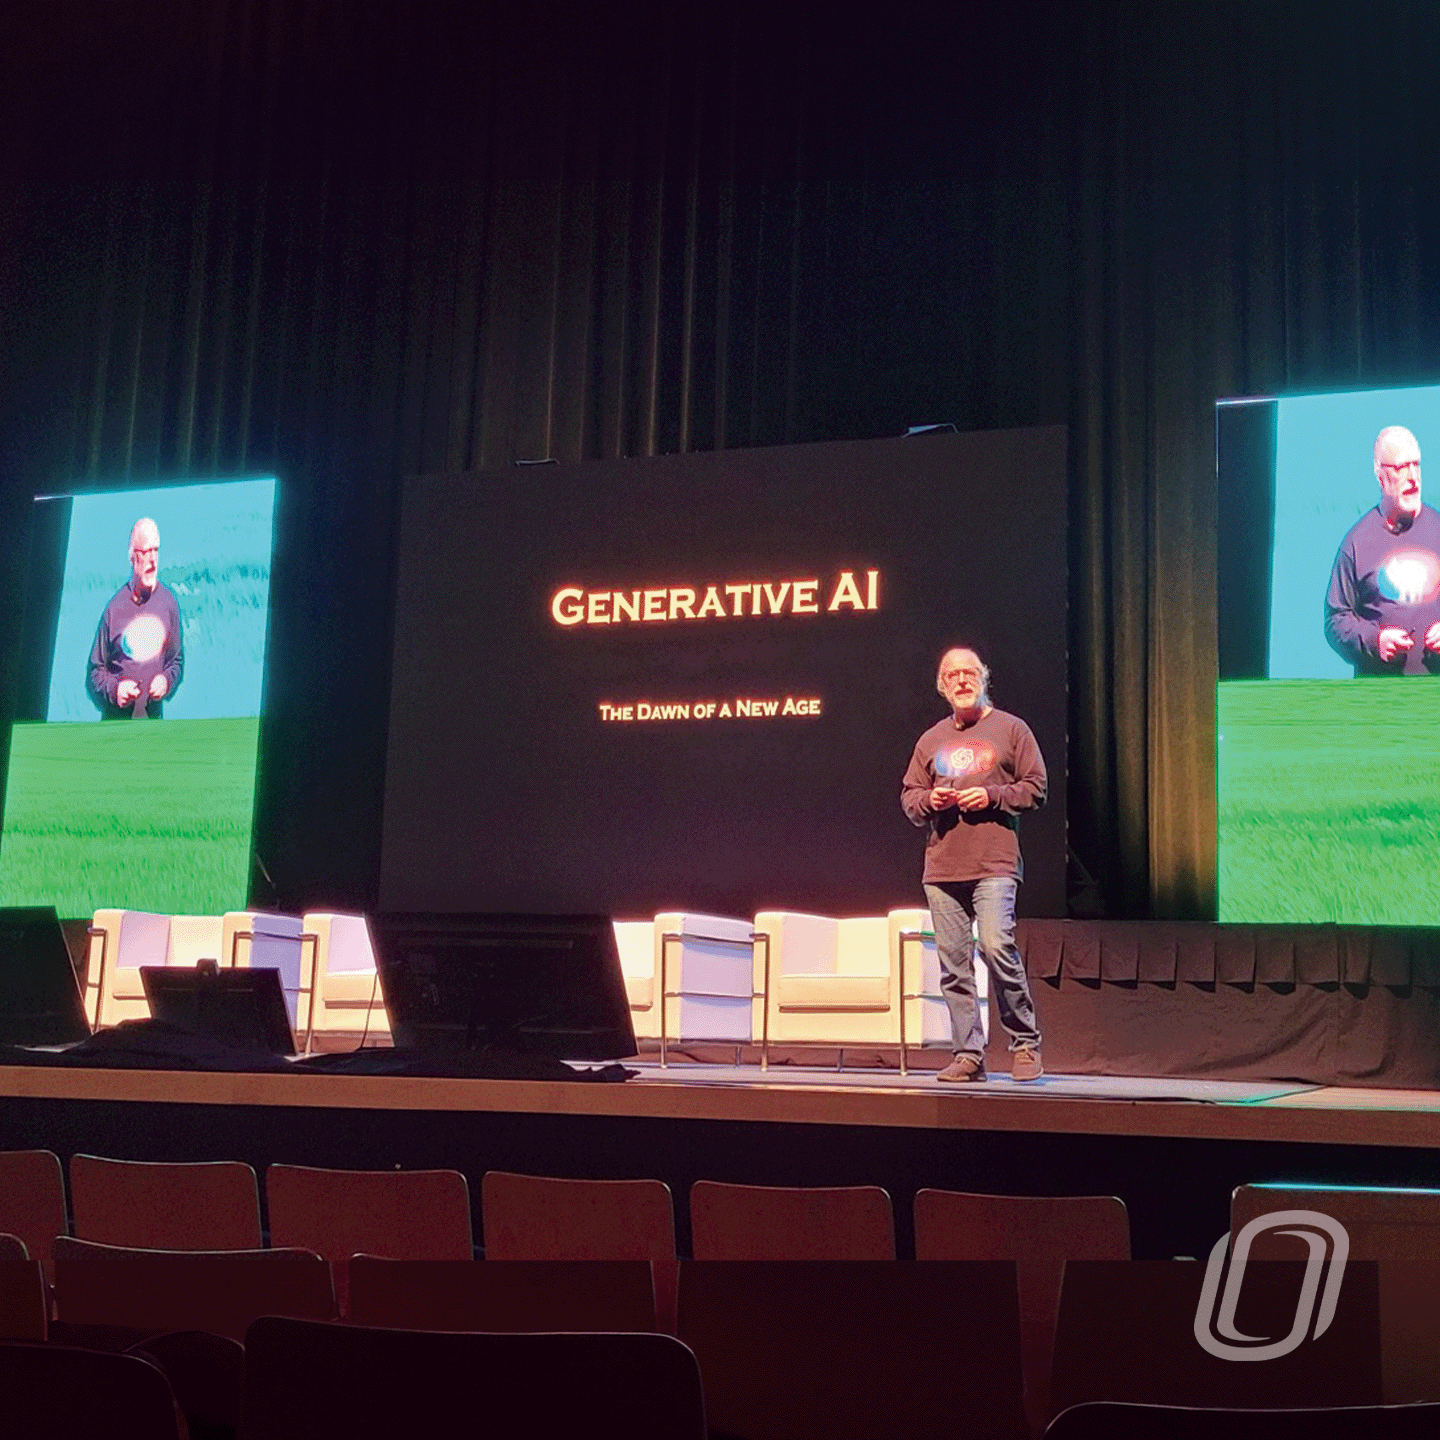 a male speaker standing on a stage in front of an audience with a large screen behind with a title "generative ai"